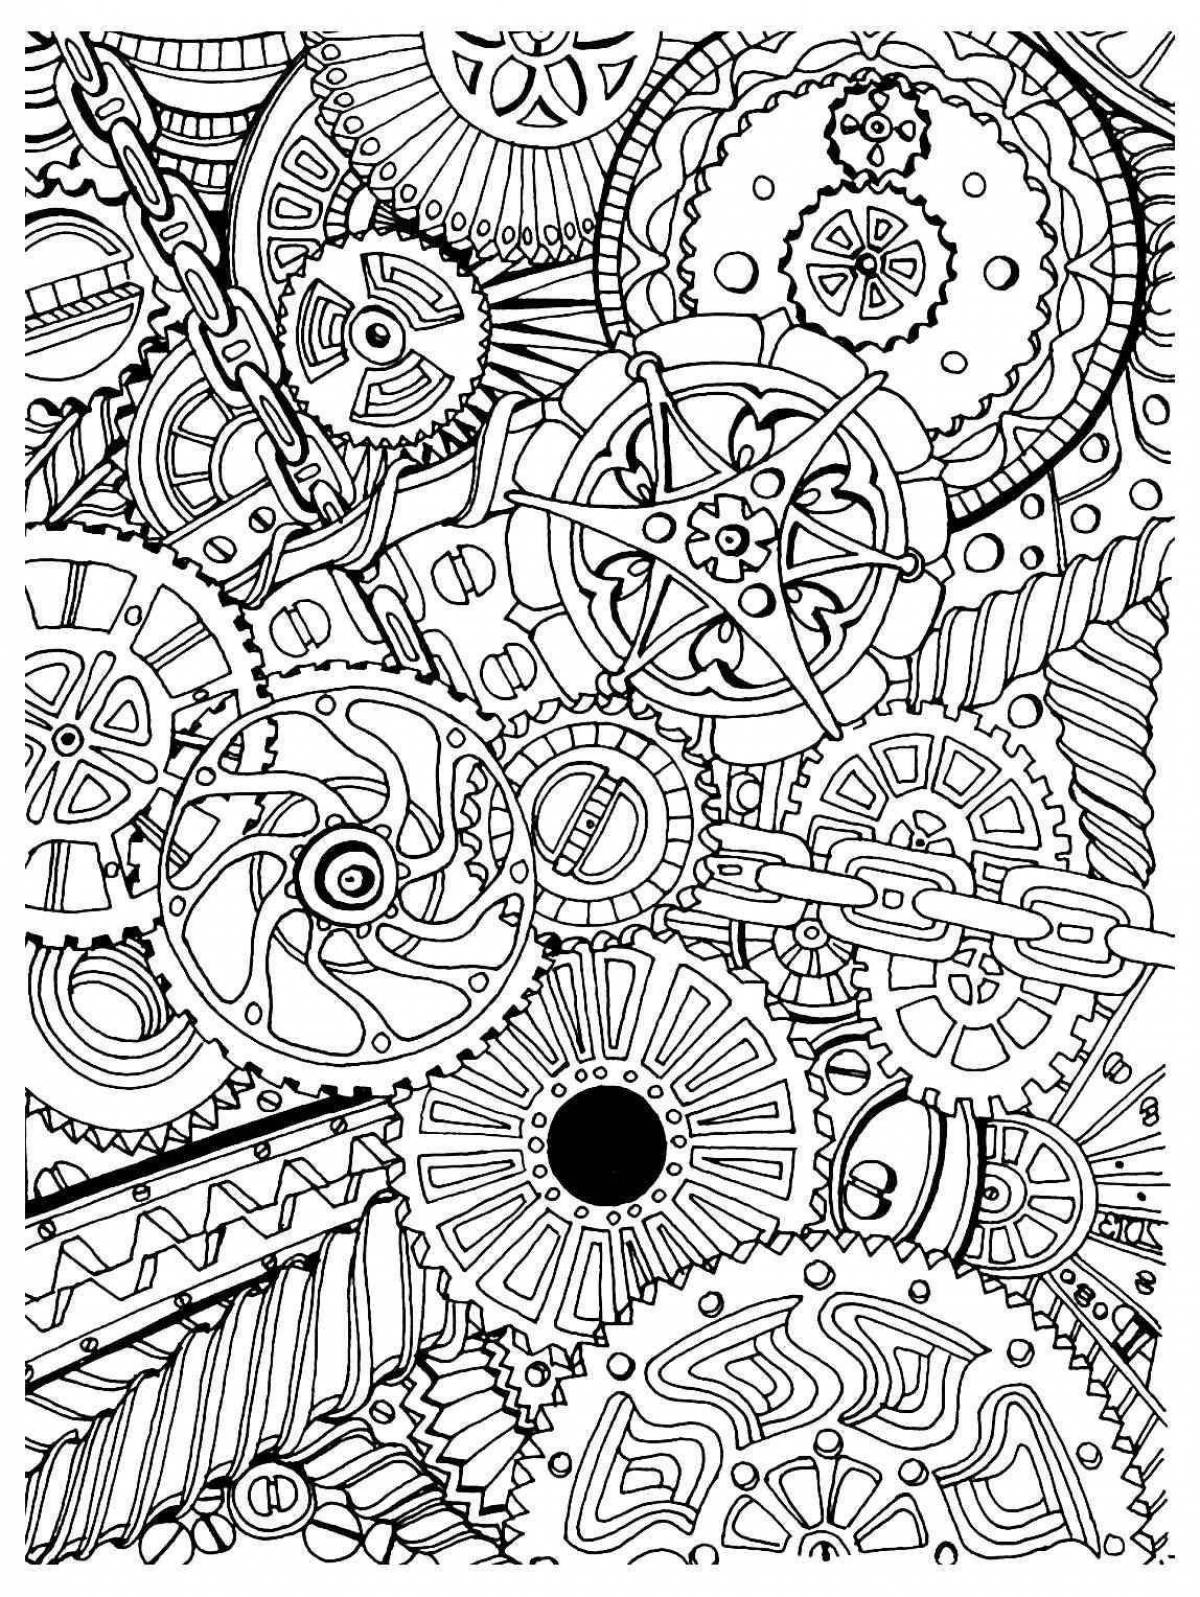 Animated large anti-stress coloring book